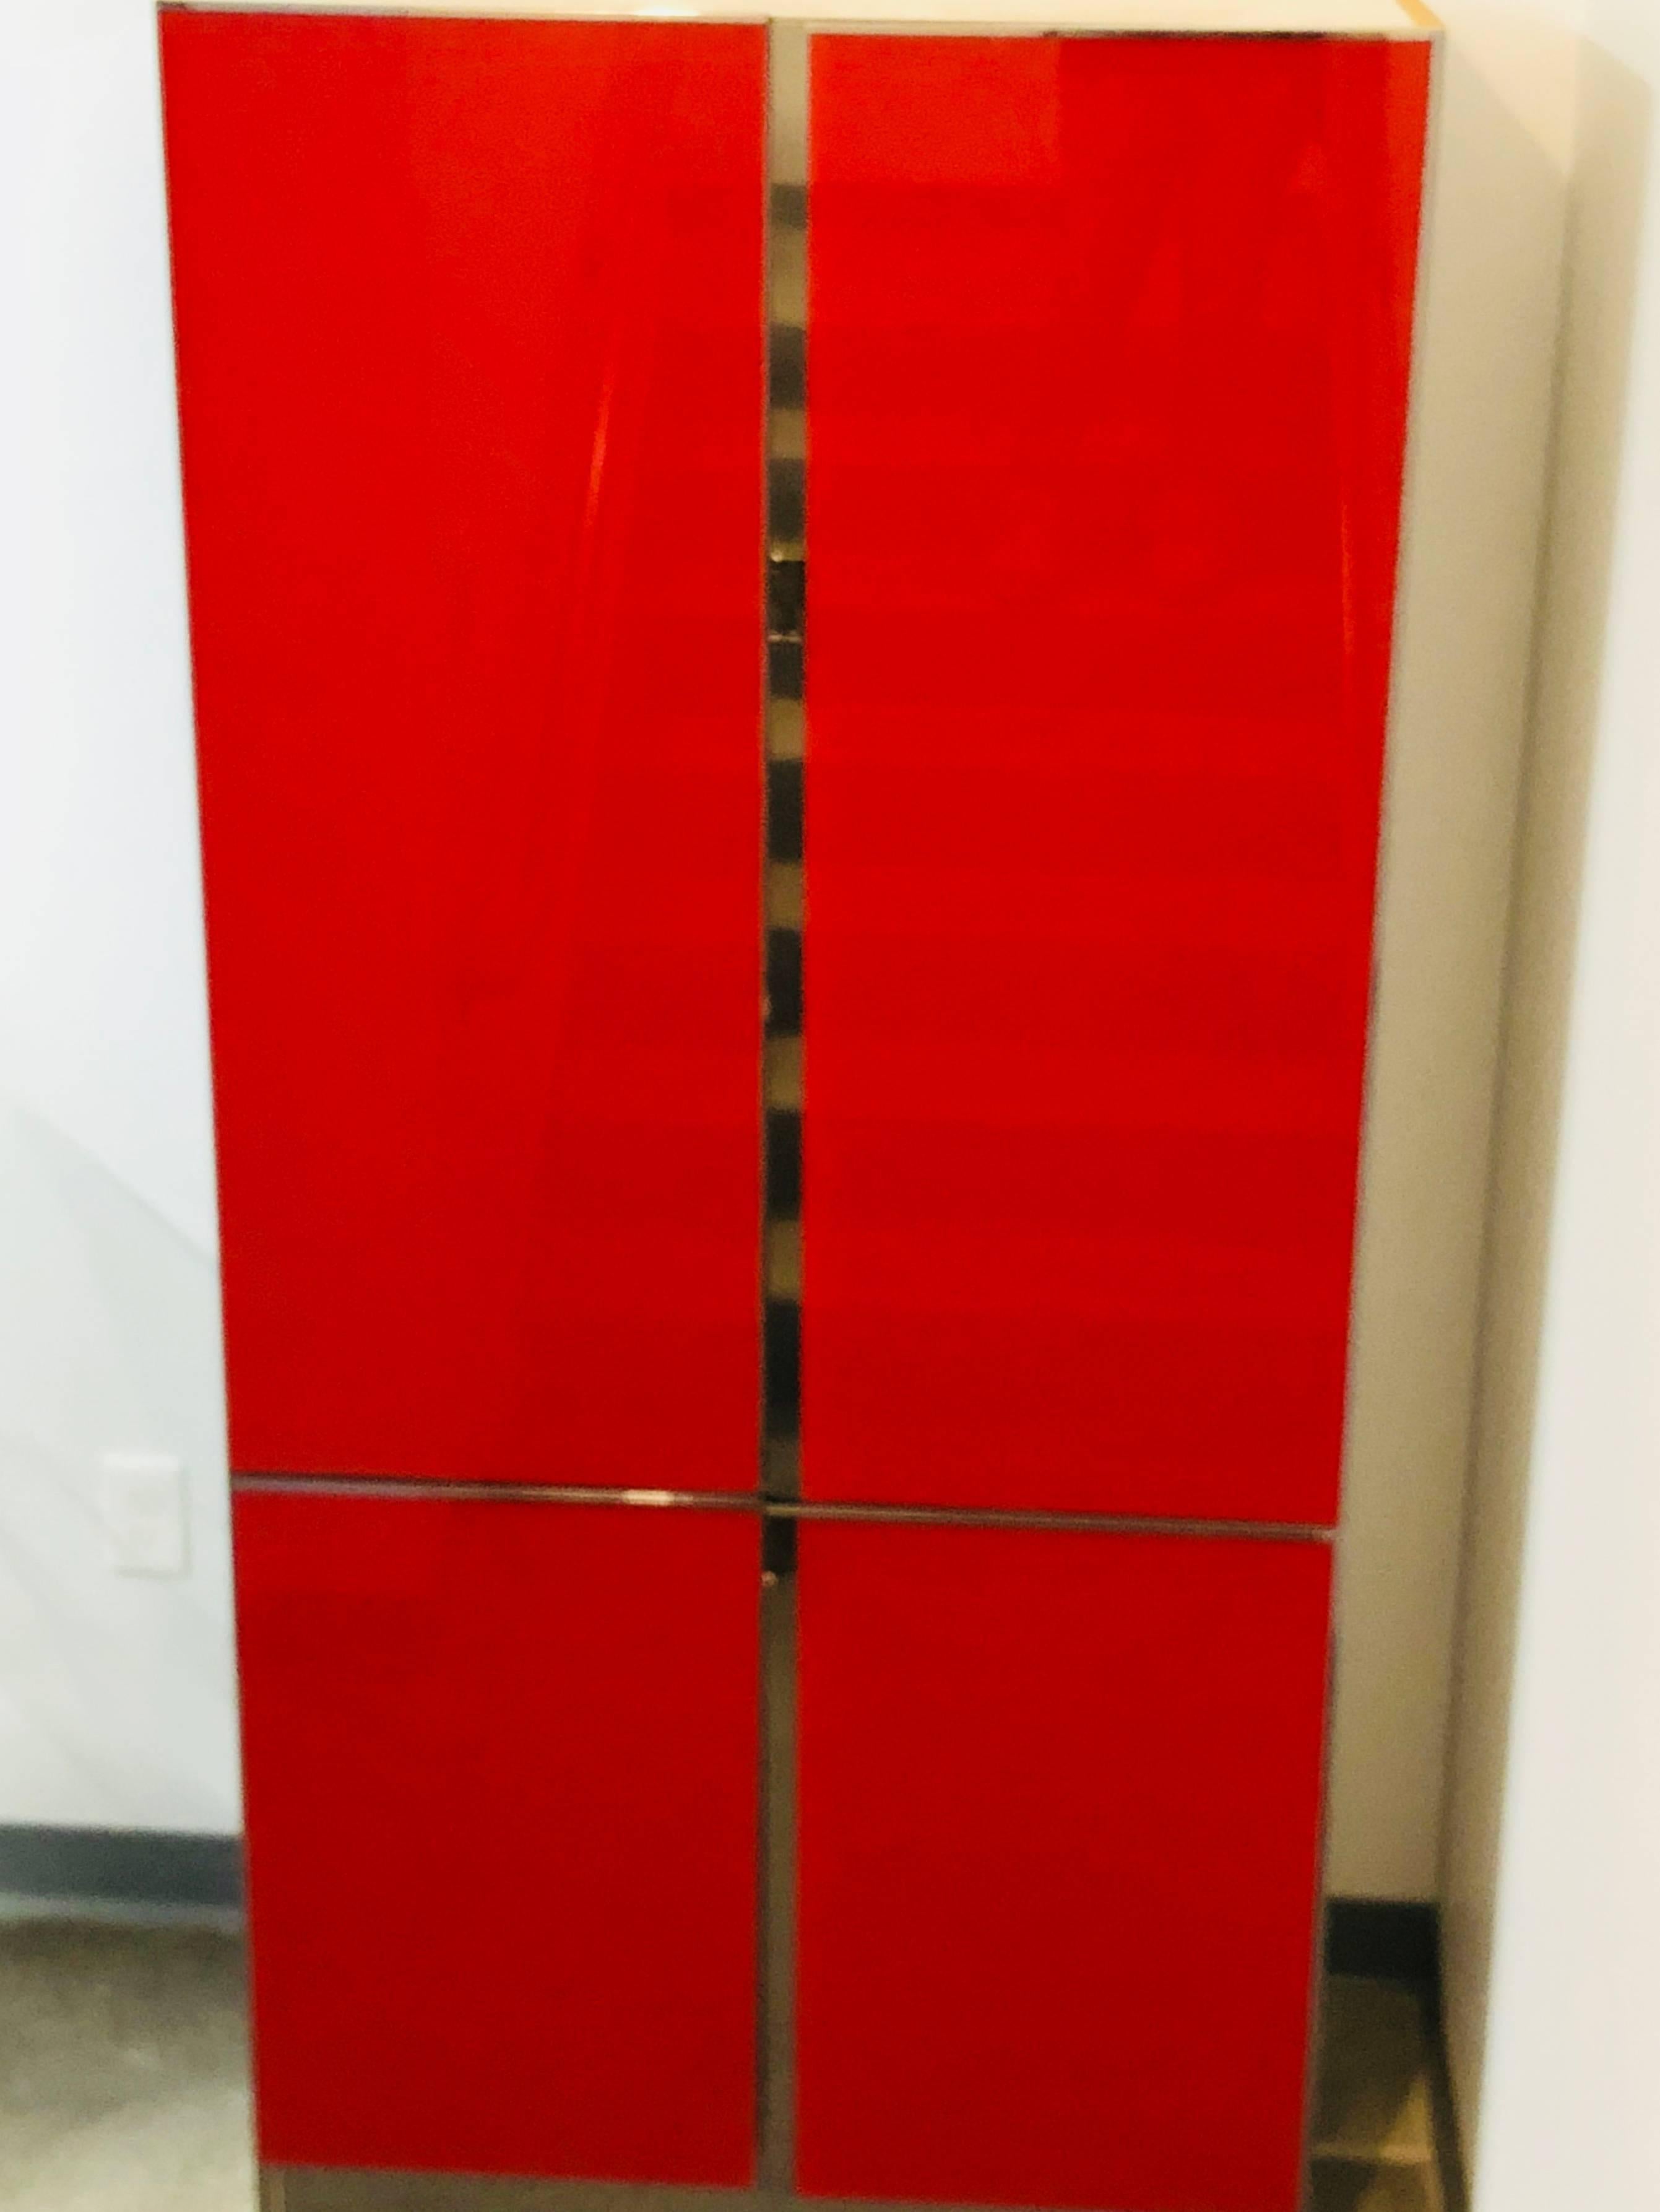 Offered is a signed with original papers Mid-Century Modern / Postmodern / contemporary Ello tall storage cabinet of red glass, chrome sides and trim and off-white laminate shelves and drawers. This Ello cabinet could have so many different uses